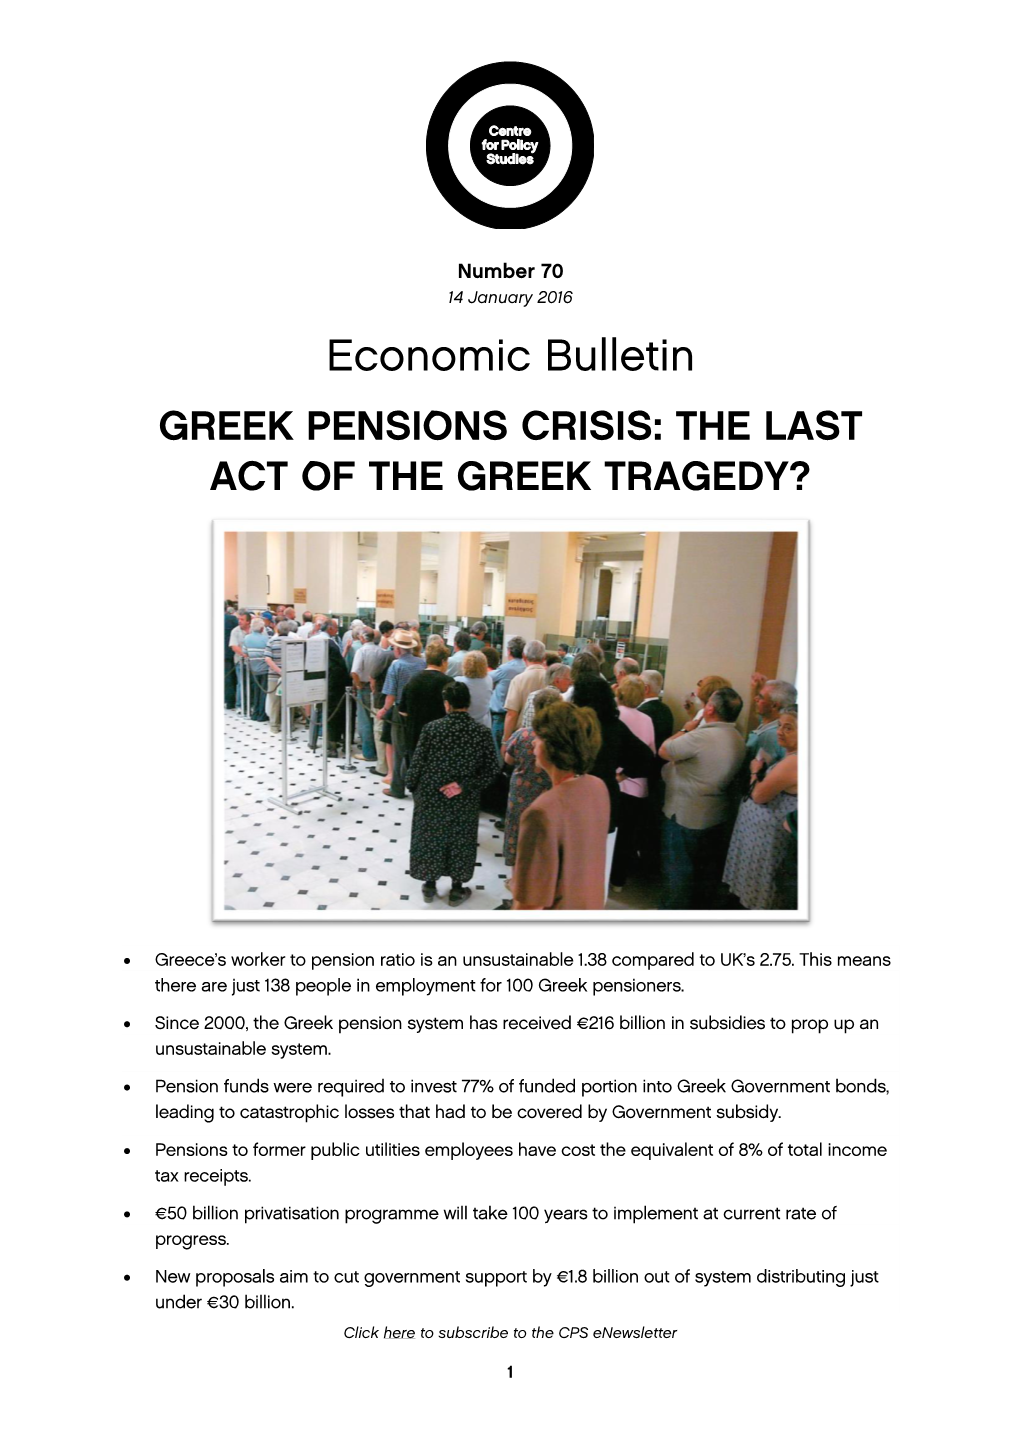 Greek Pensions Crisis: the Last Act of the Greek Tragedy?